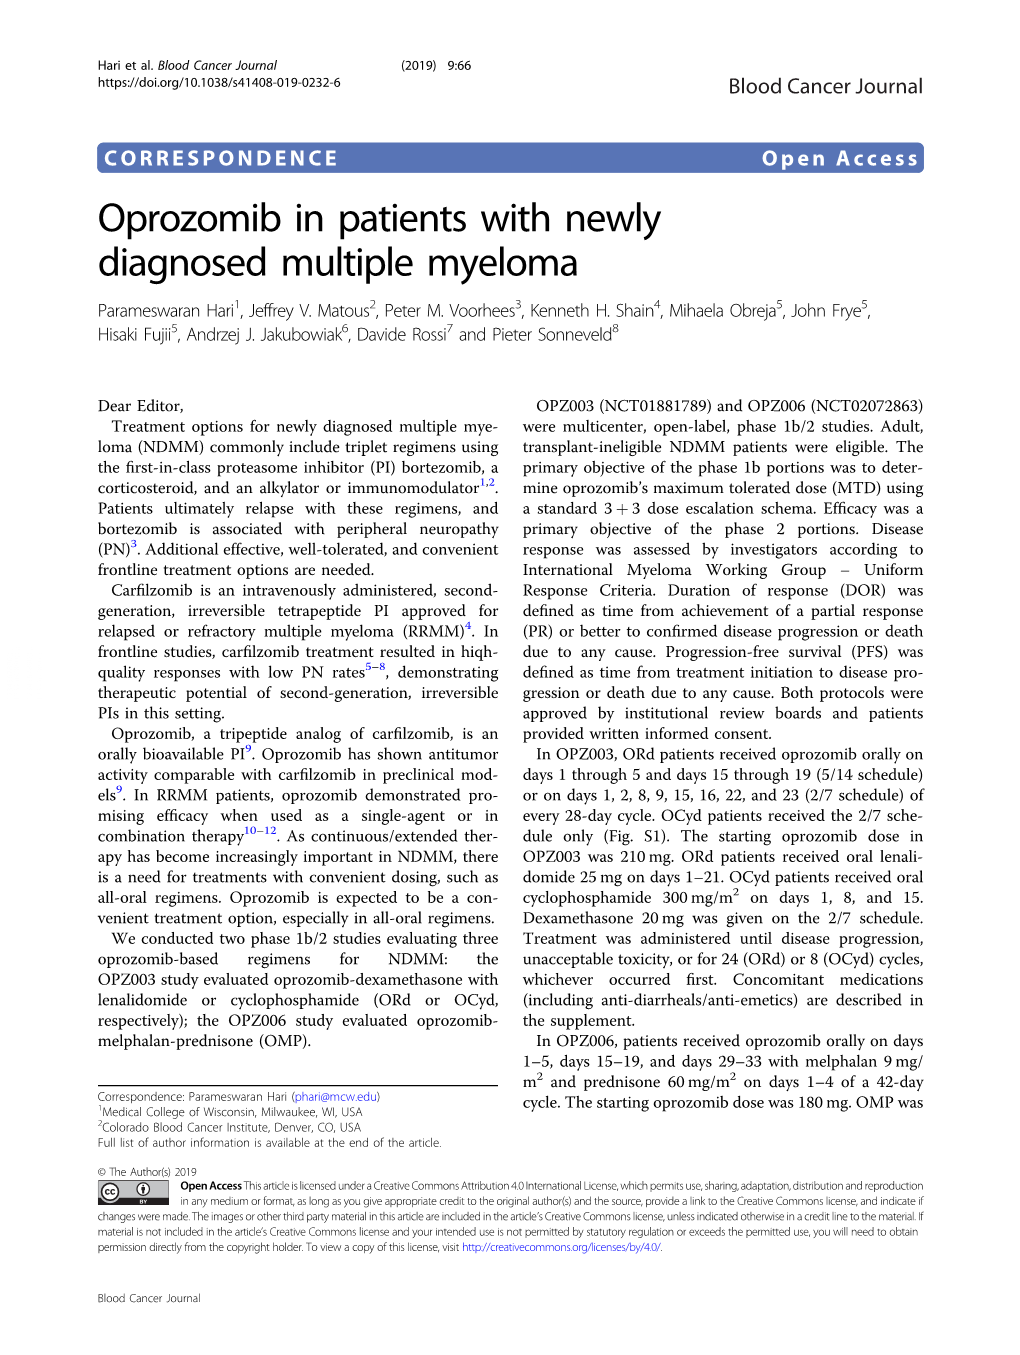 Oprozomib in Patients with Newly Diagnosed Multiple Myeloma Parameswaran Hari1, Jeffrey V